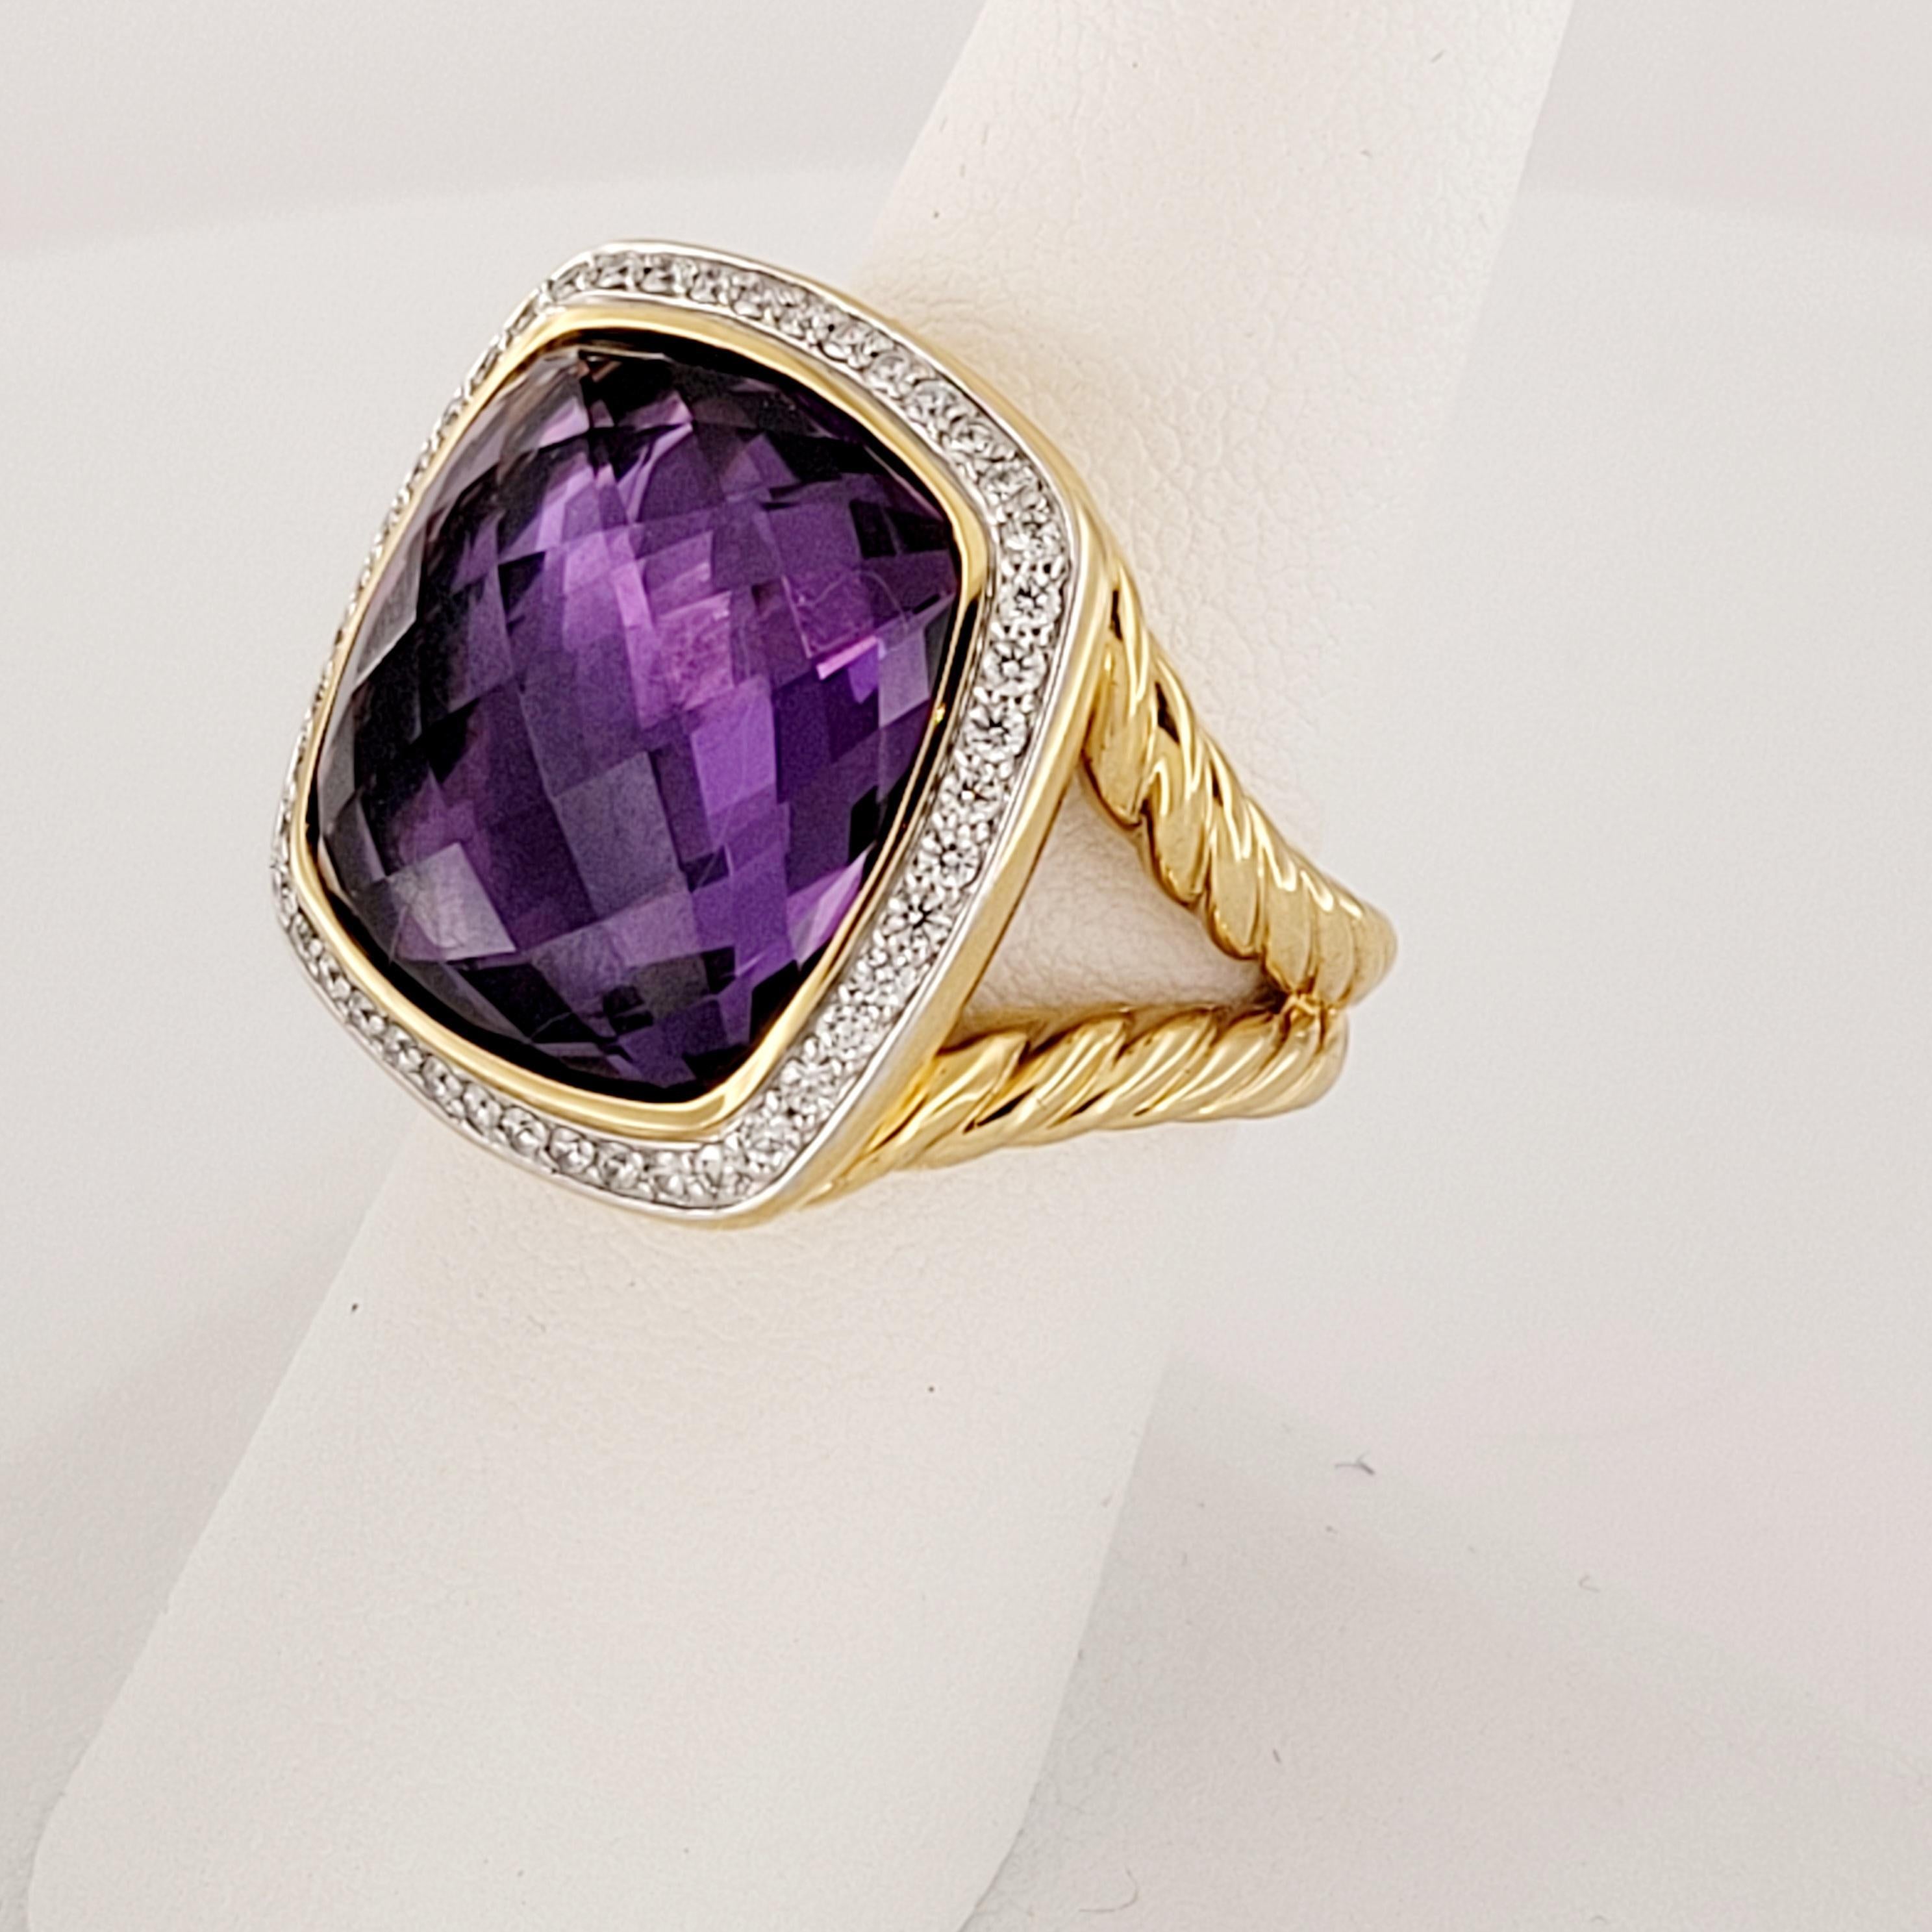 Women's David Yurman Albion Ring with Amethyst and Diamonds in 18k Gold